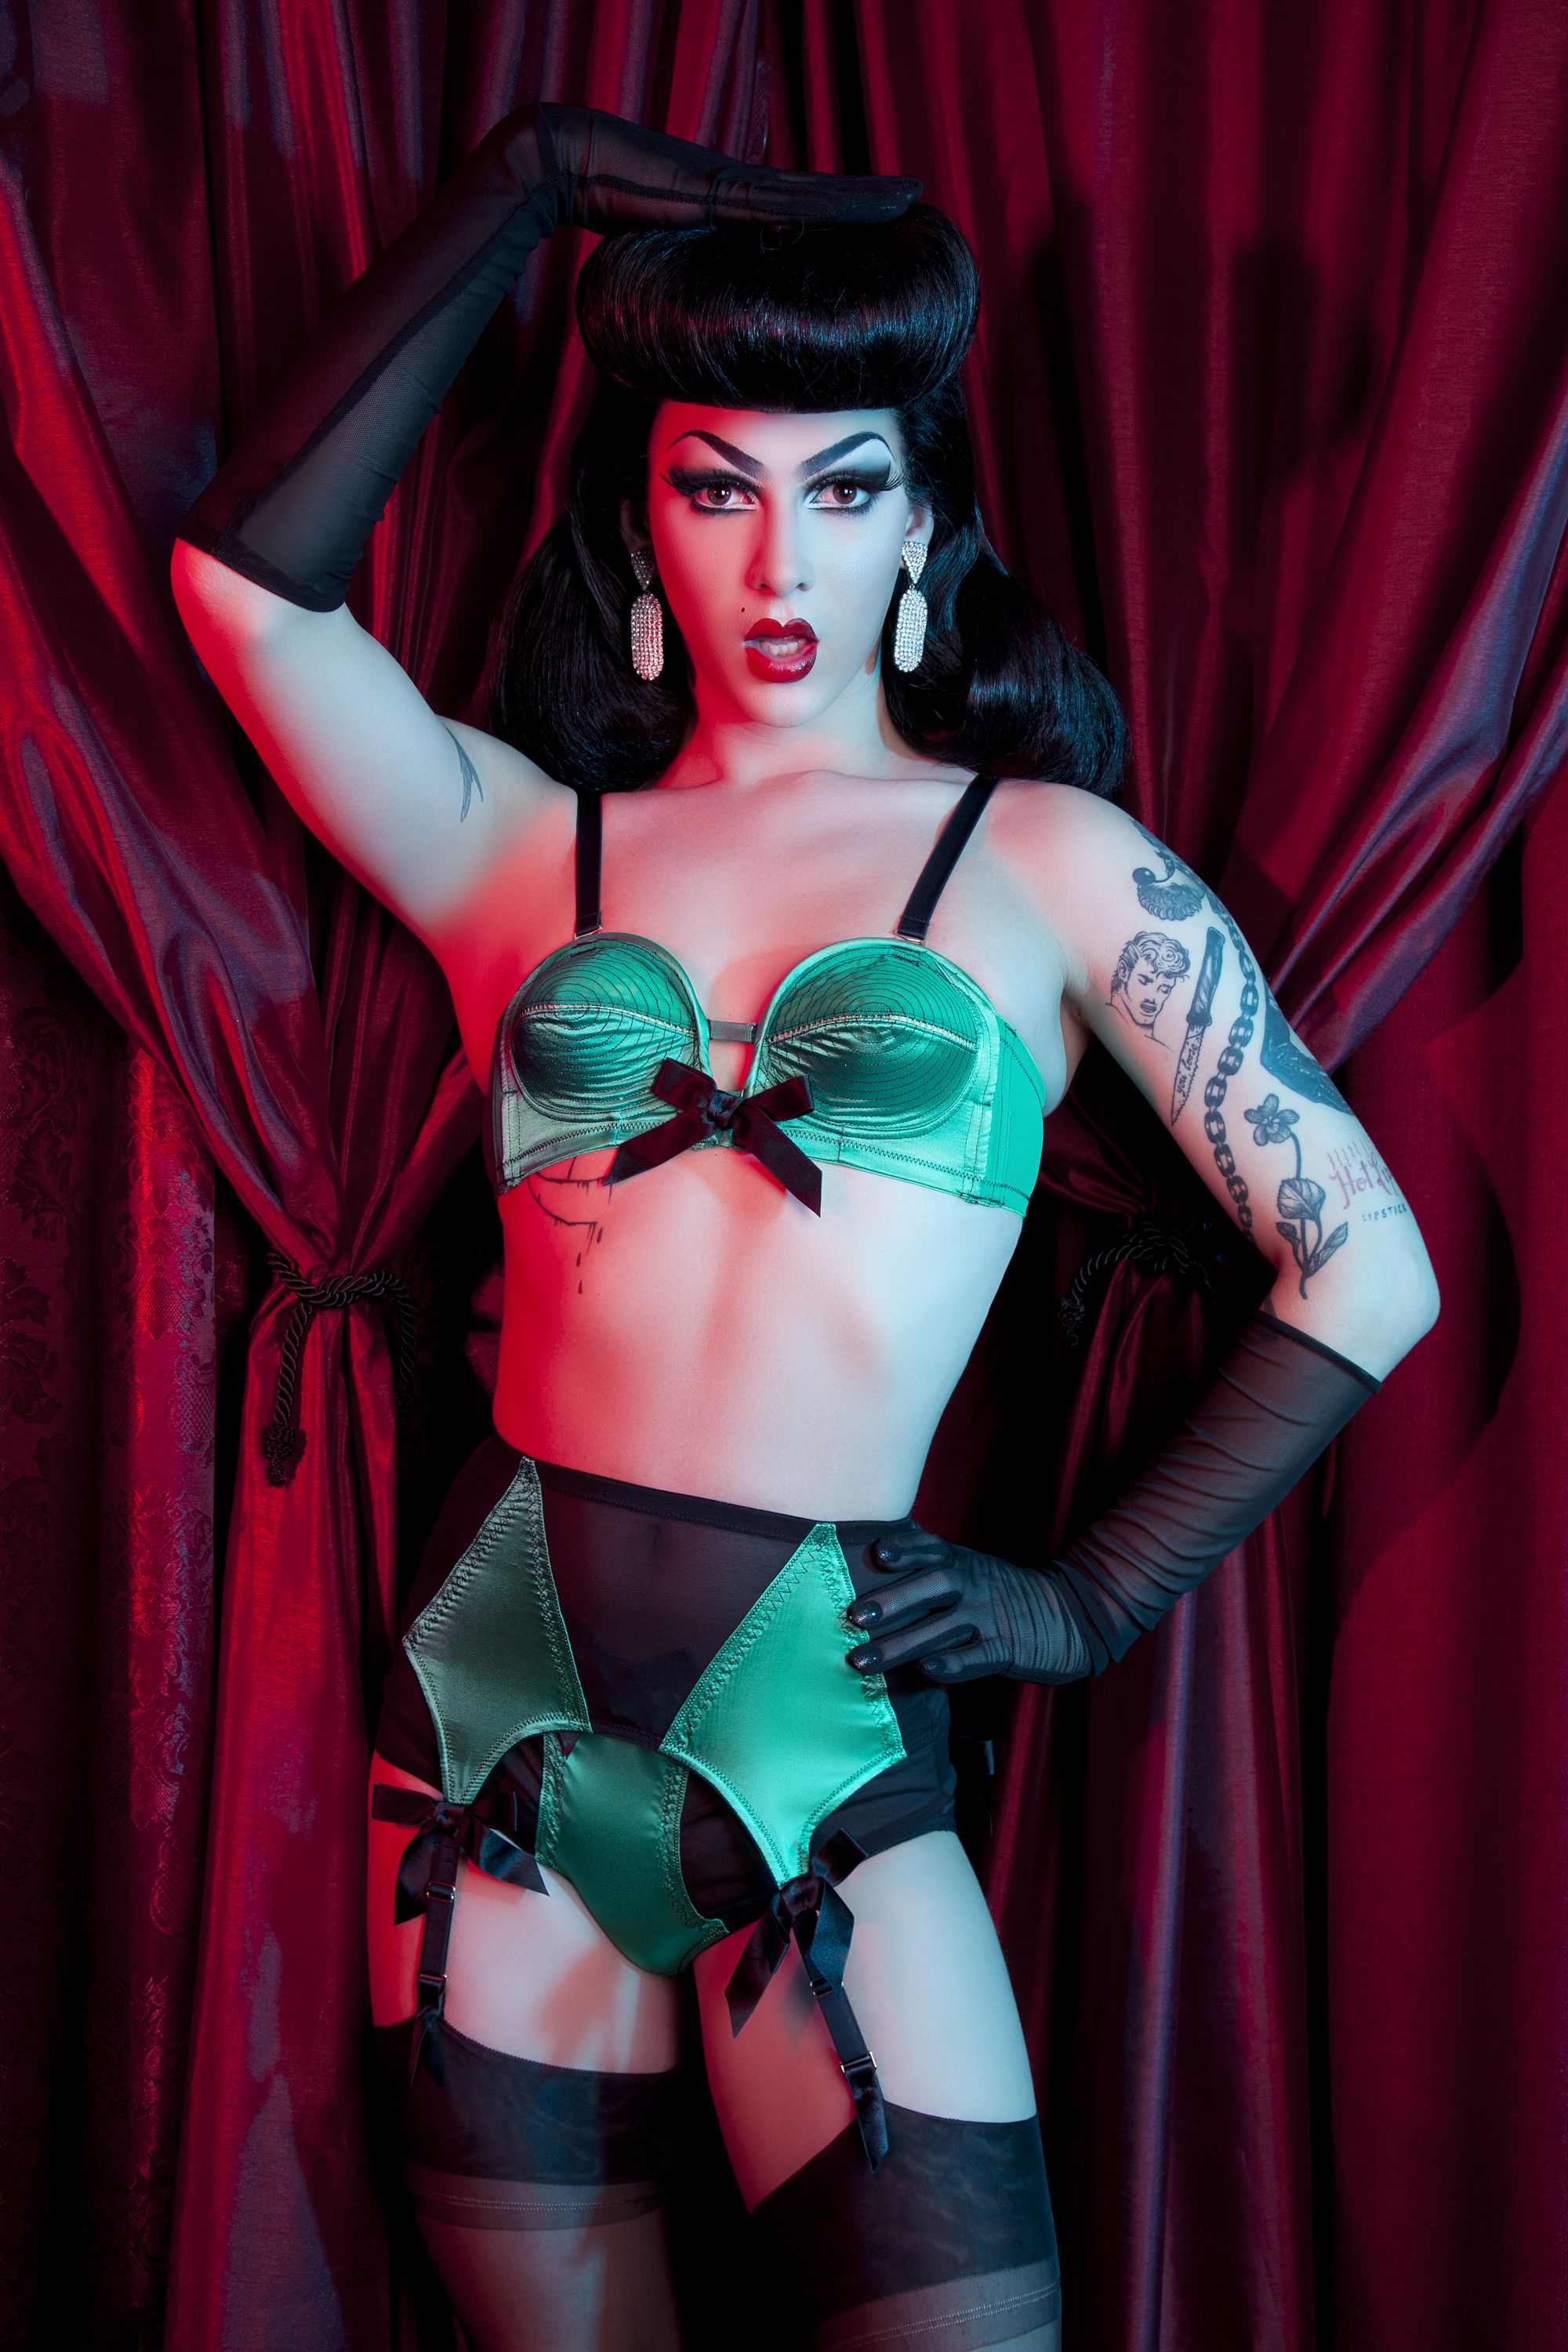 Violet Chachki Becomes The First Drag Queen To Face A Lingerie Campaign pic